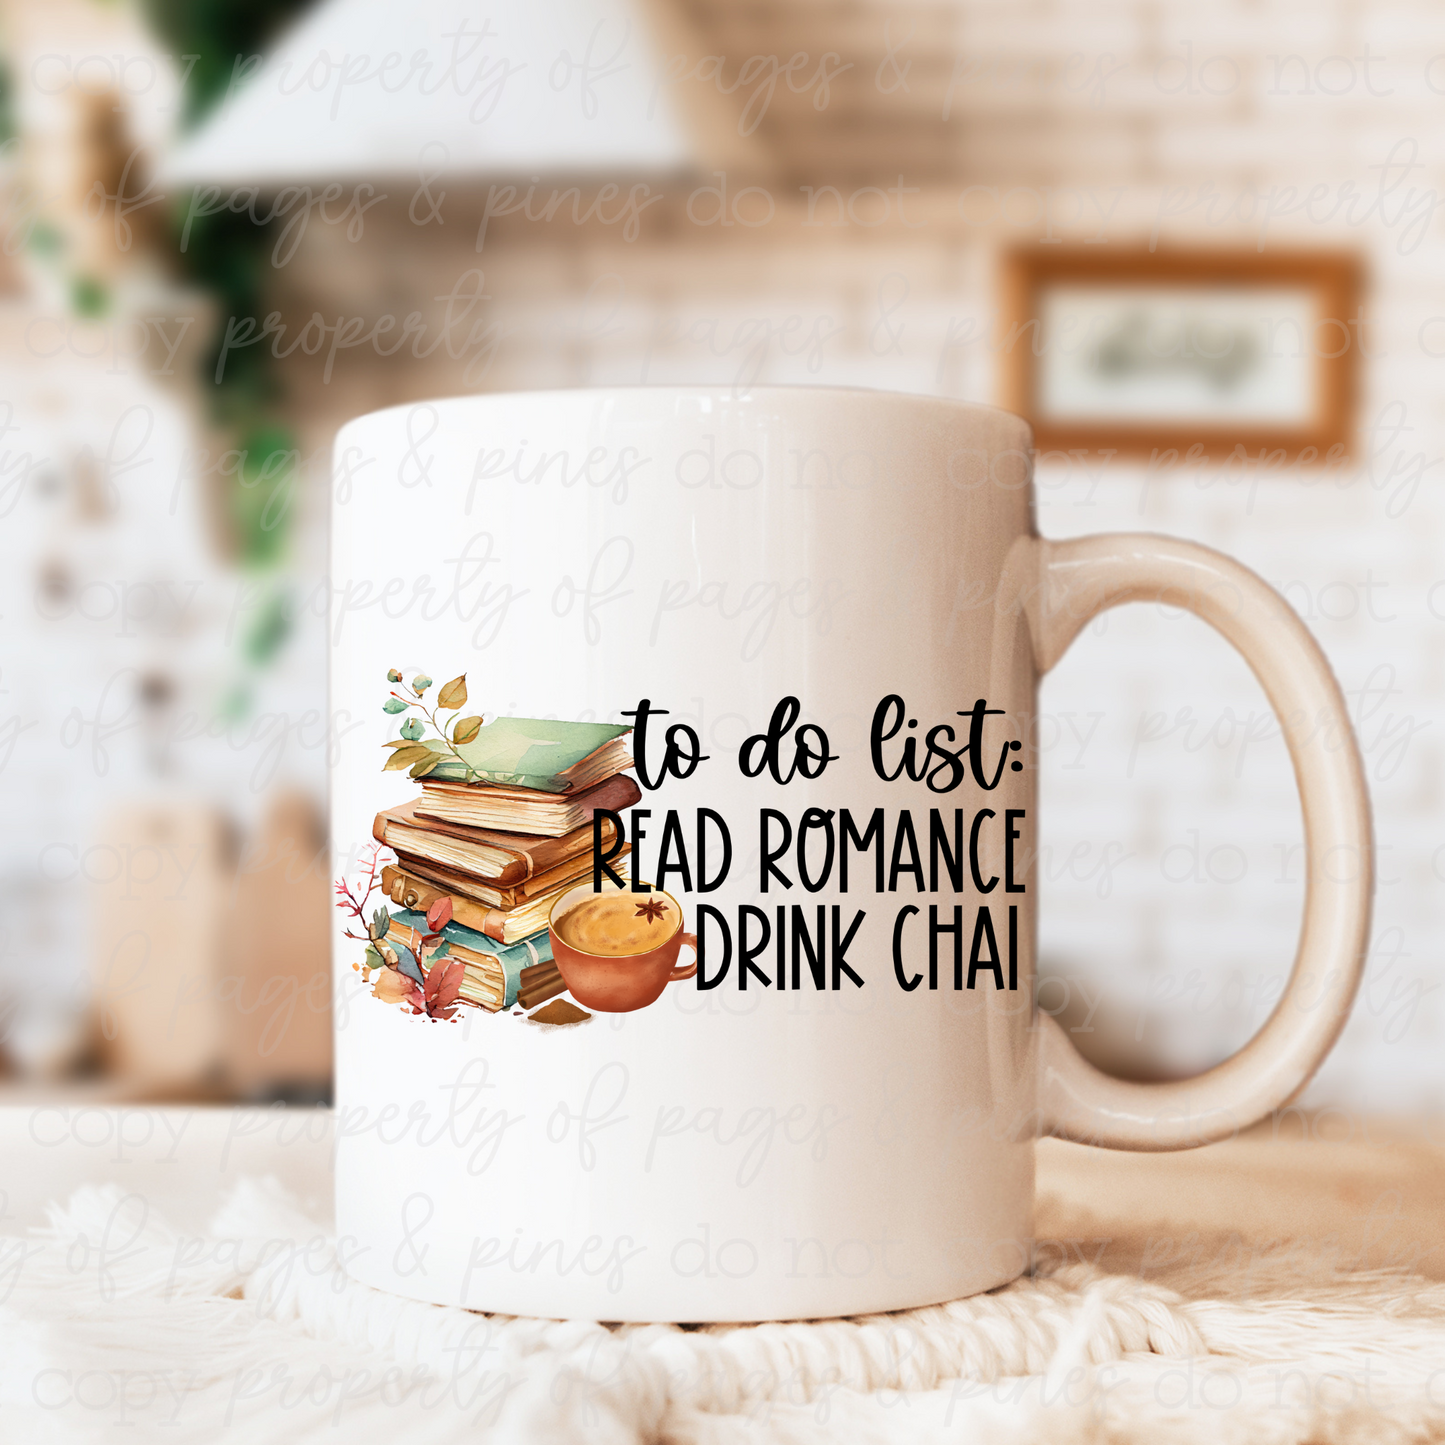 Read Romance and Drink Chai